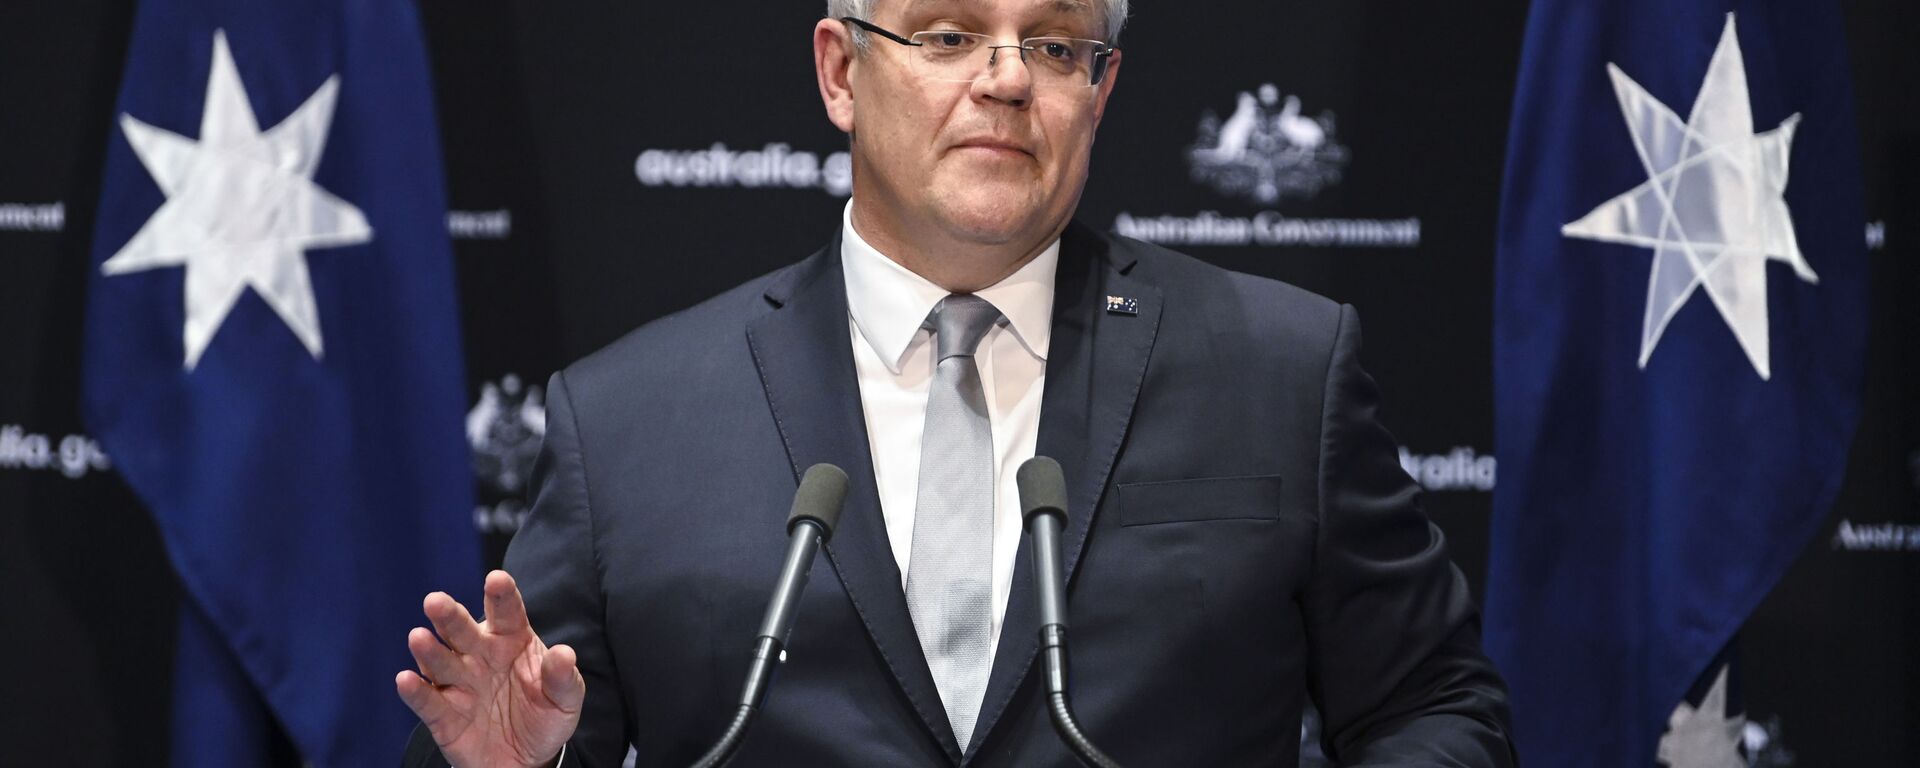 Australian Prime Minister Scott Morrison speaks to the media during a press conference at Parliament House in Canberra, Friday, May 1, 2020 - Sputnik International, 1920